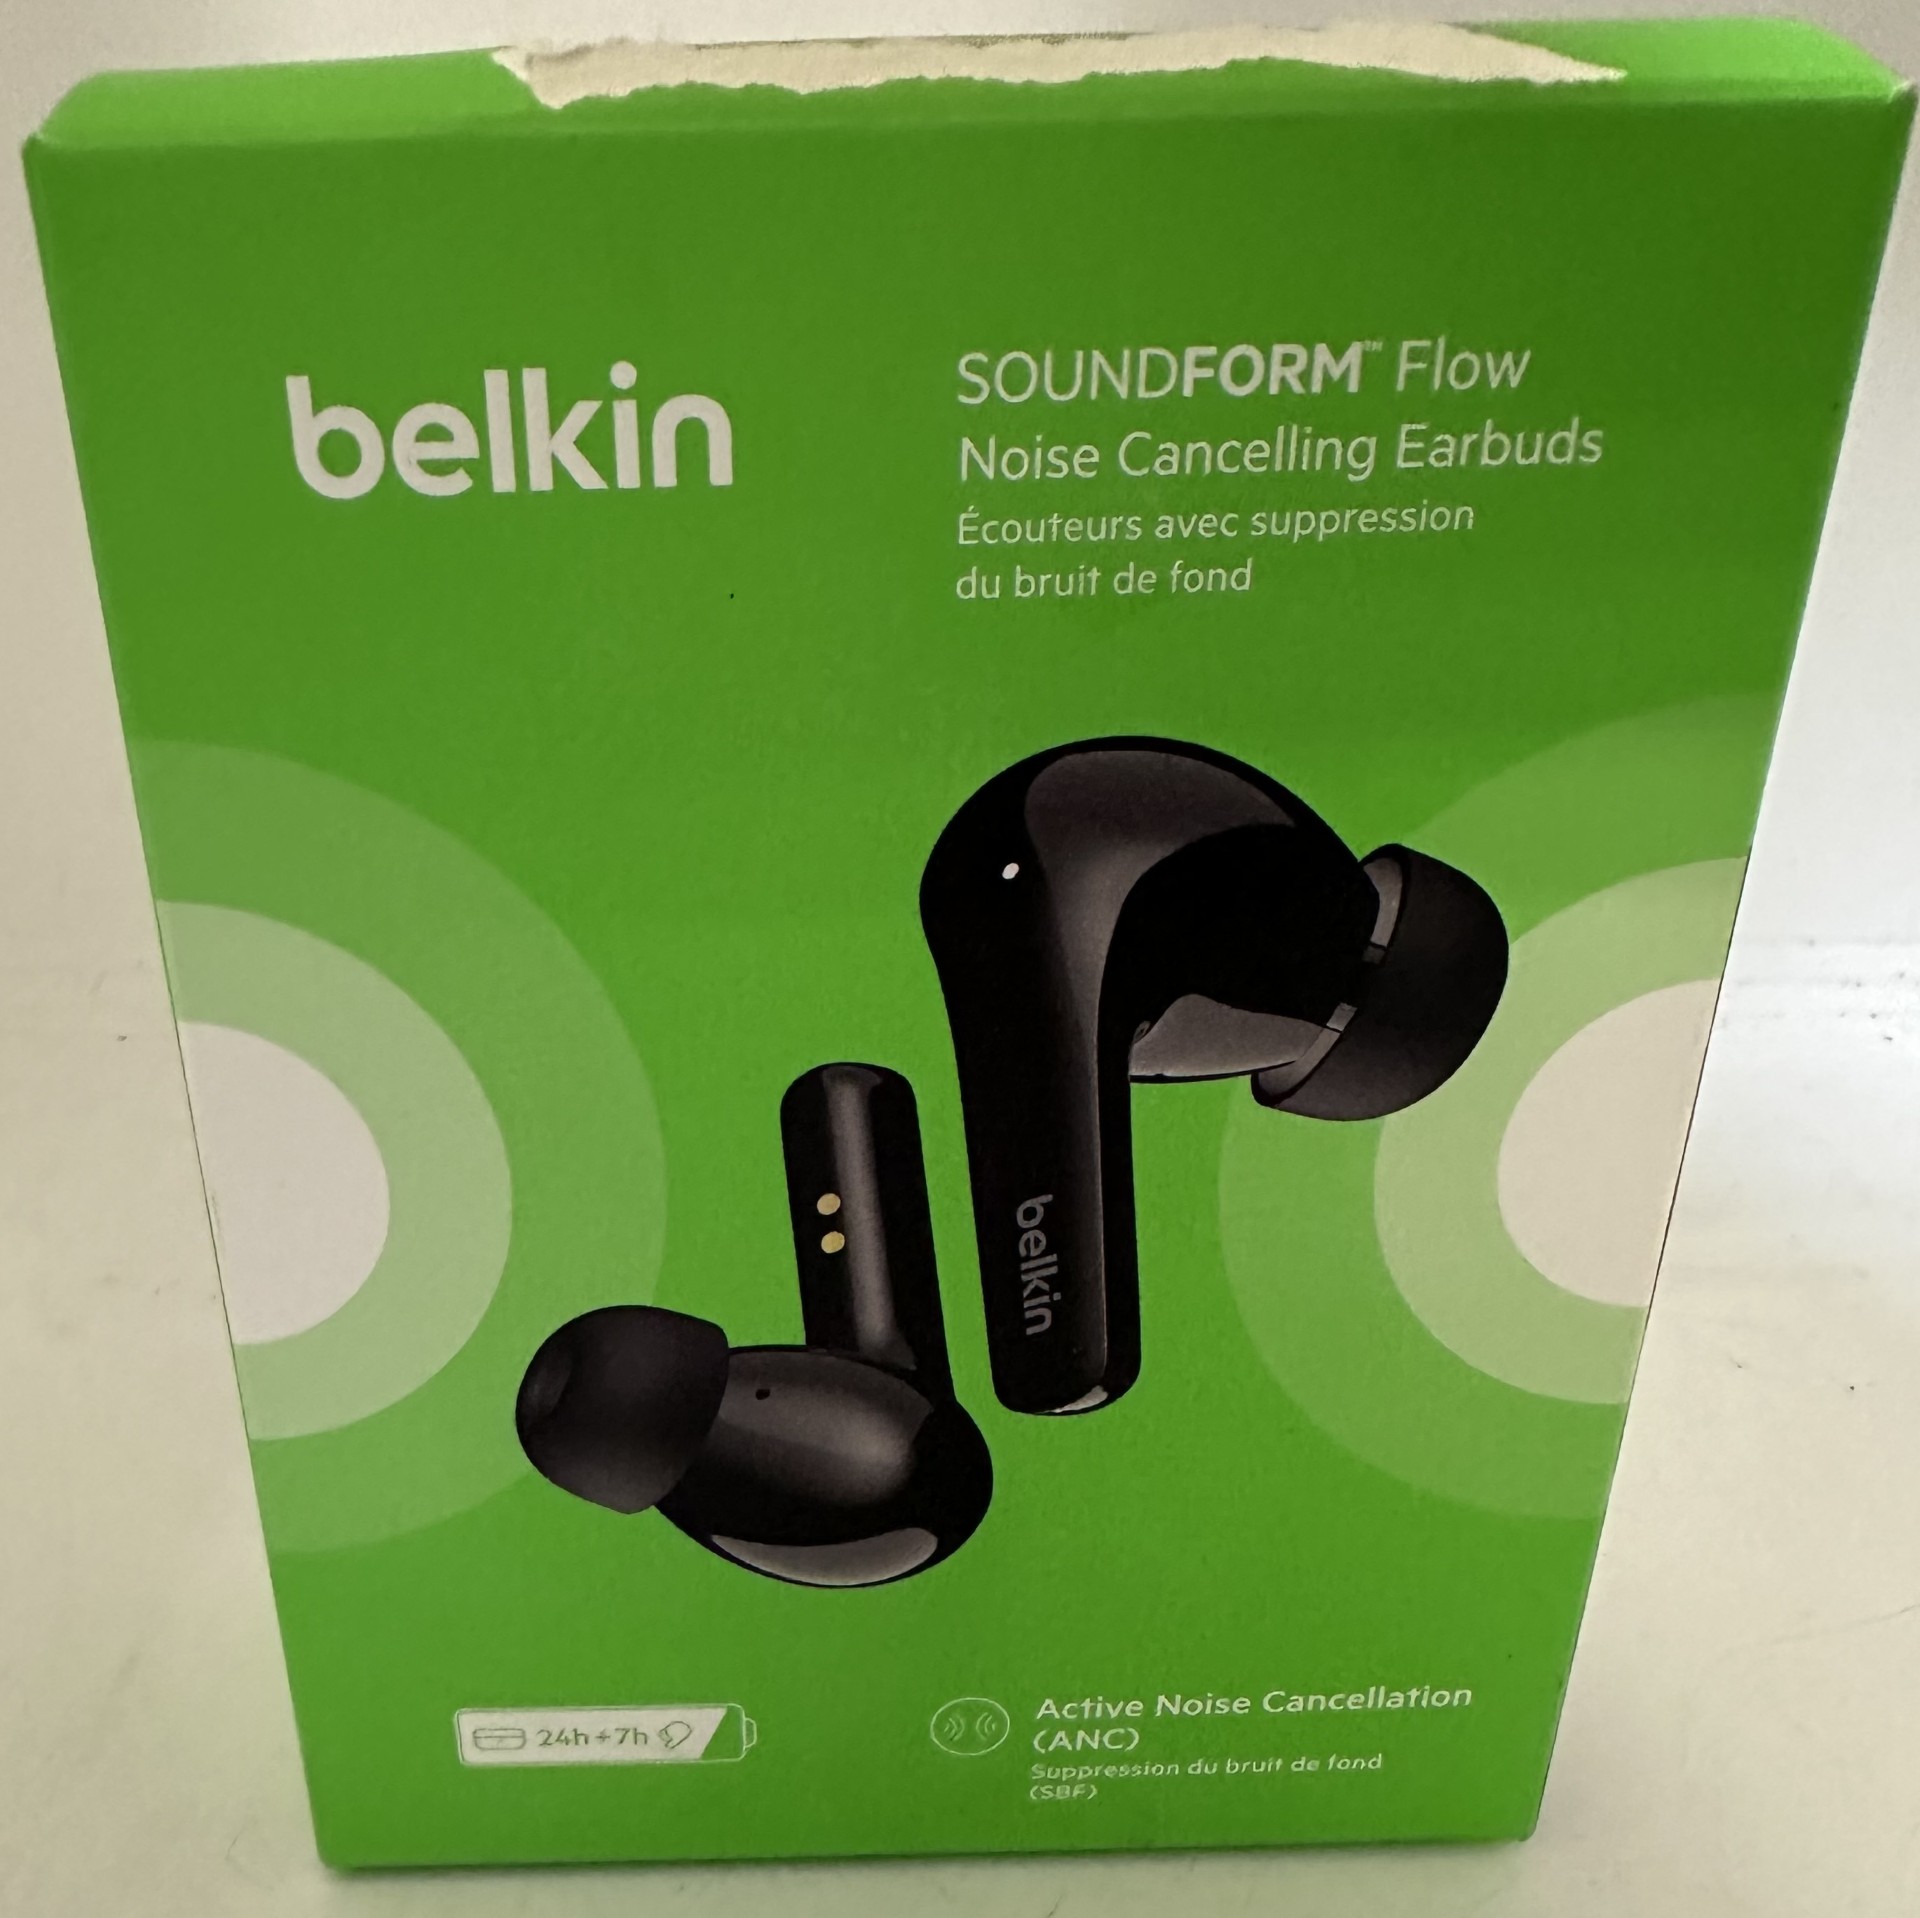 Belkin Soundform Flow Noise Cancelling Earbuds Boxed New 